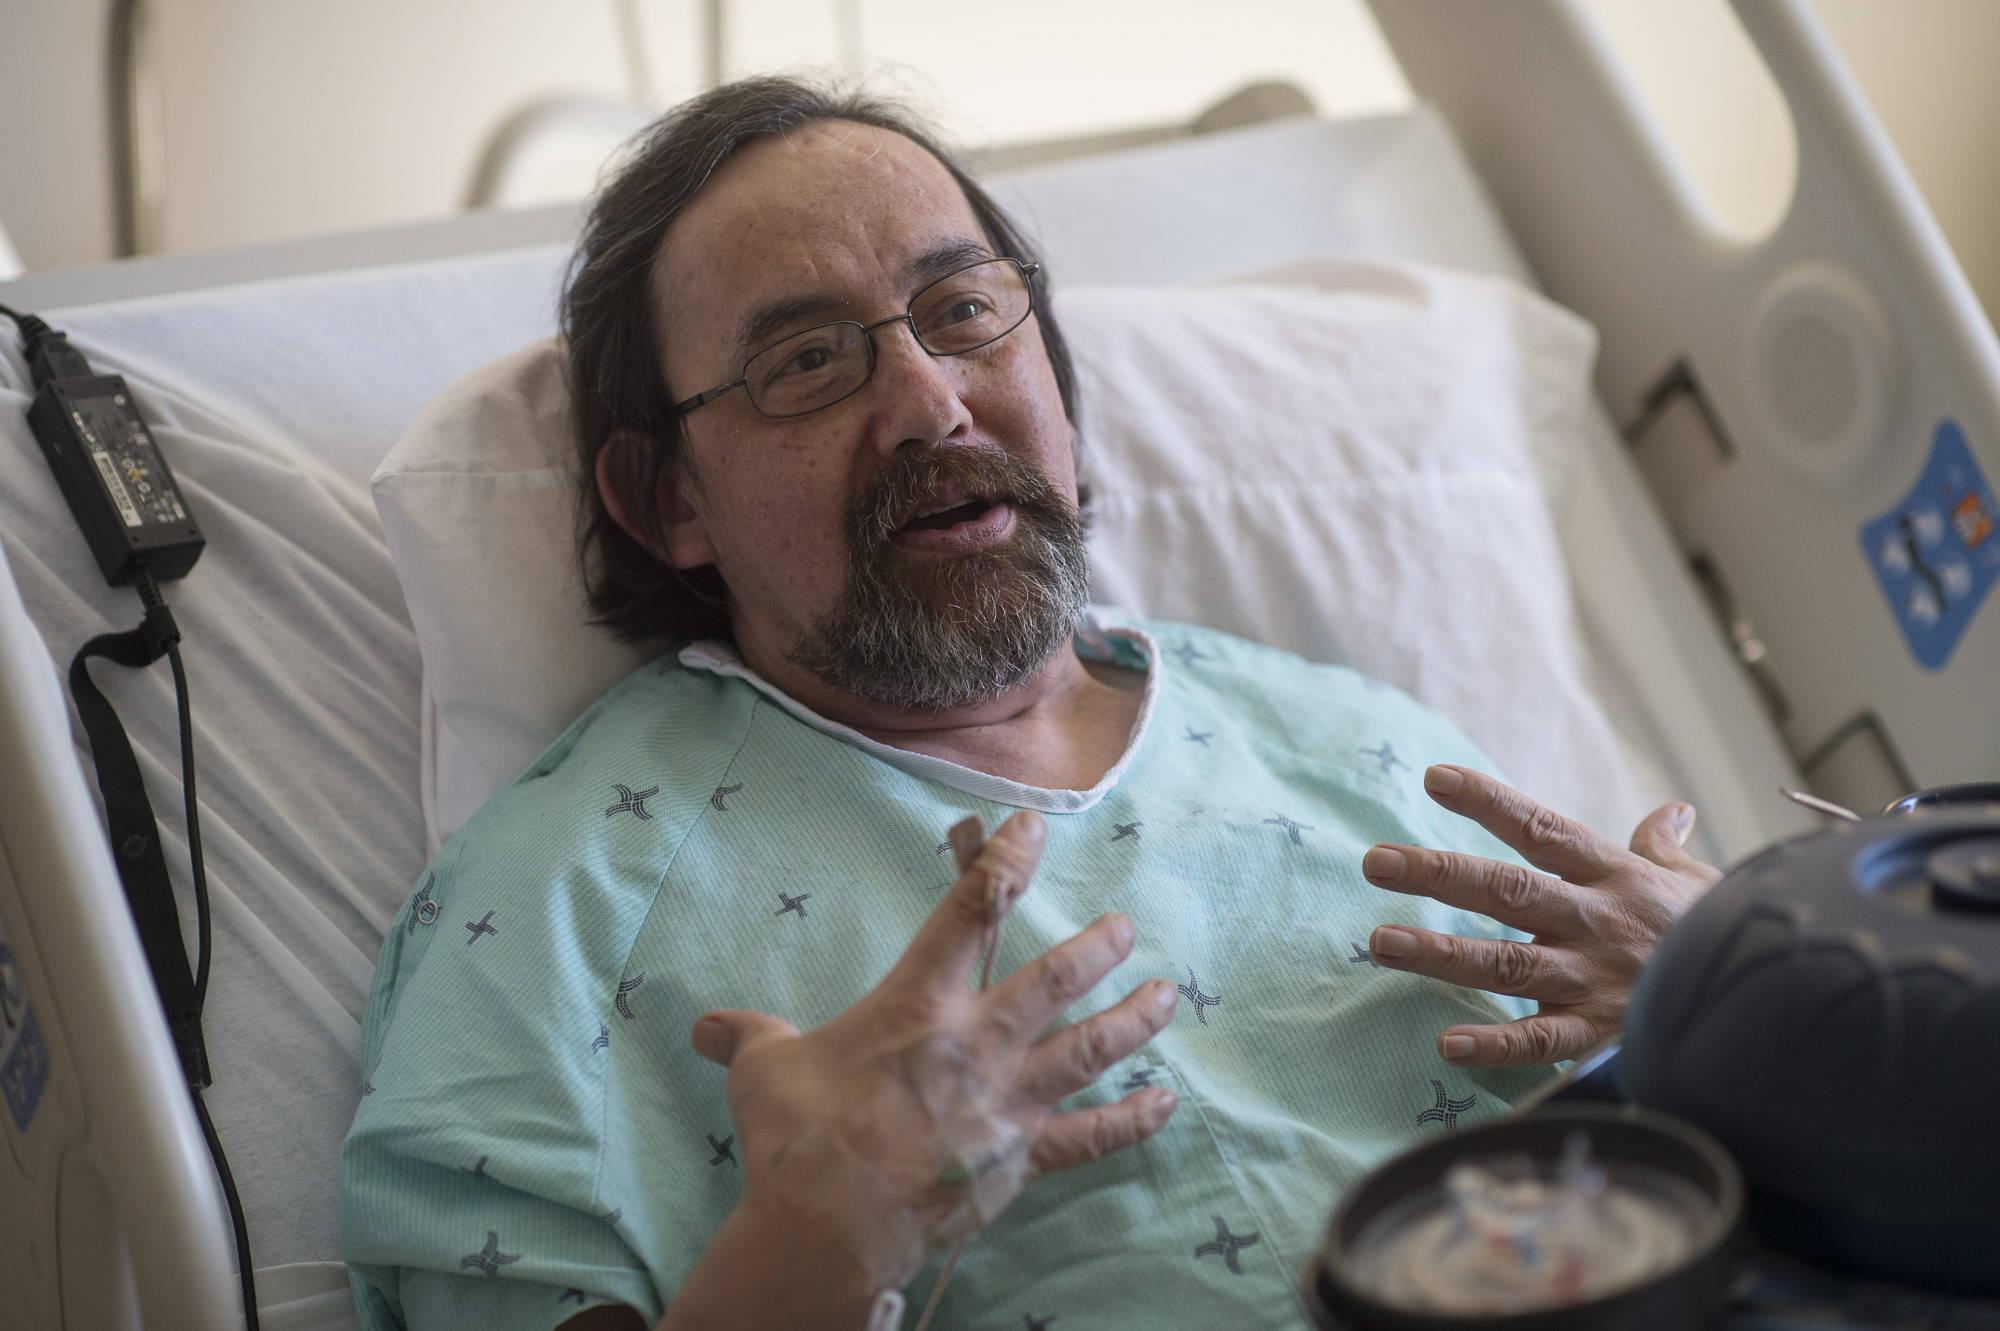 Michael Patterson, the self-proclaimed “Ghostwalker” of Juneau, speaks from a bed at Bartlett Regional Hospital on Wednesday, April 11, 2018. Patterson, a spokesperson for the Center for Disease Control’s anti-smoking campaign, is diagnosed with Chronic Obstructive Pulmonary Disorder, a form of emphysema. Patterson said exposure to black mold sent him to the hospital with symptoms like pneumonia. (Michael Penn | Juneau Empire)